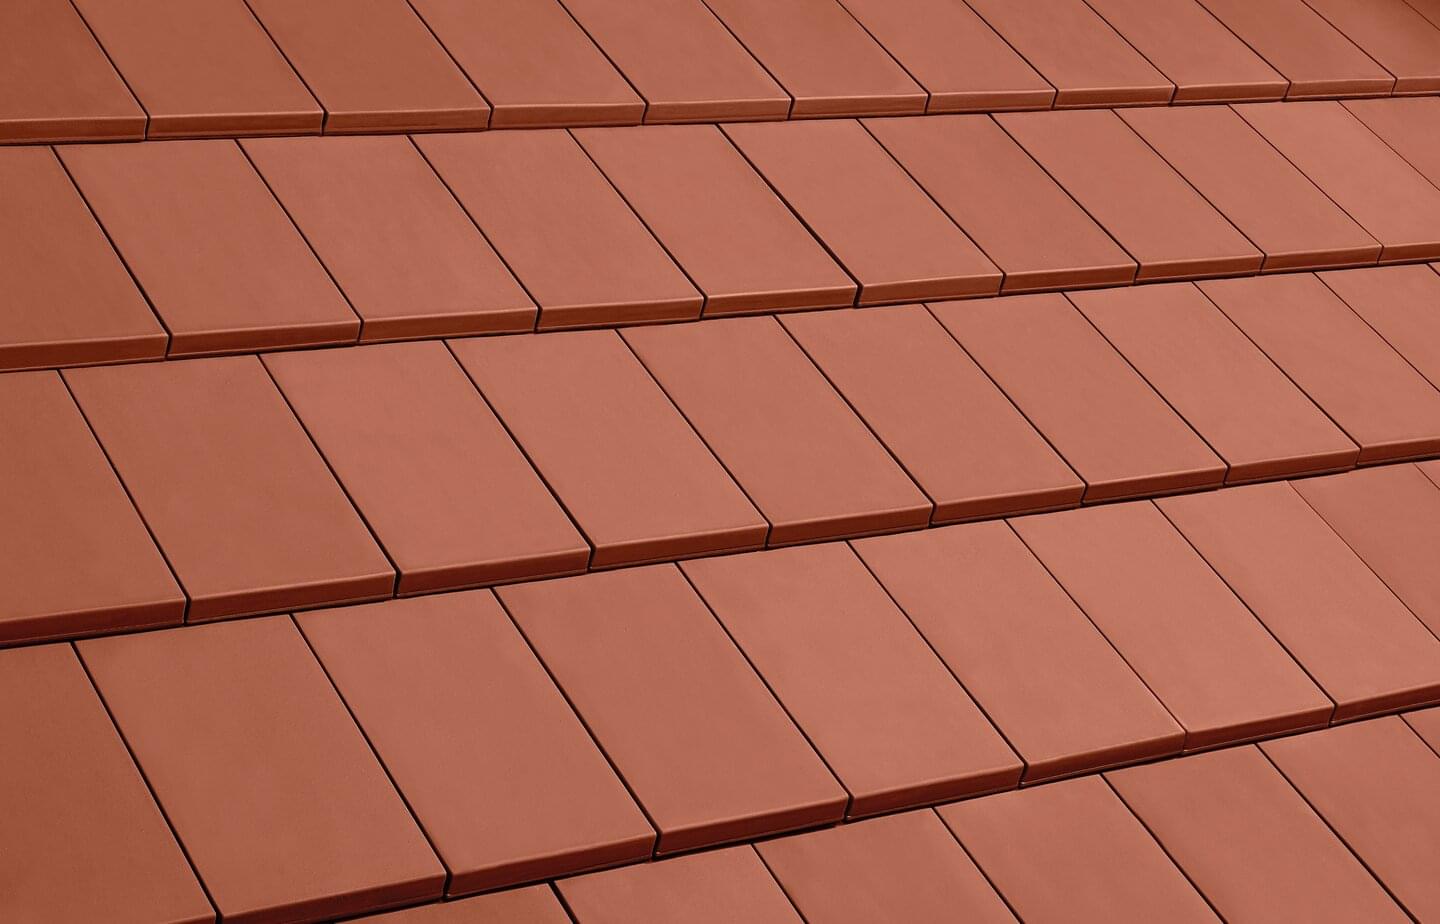 Level RS® - Sinter cotto | Image roof surface